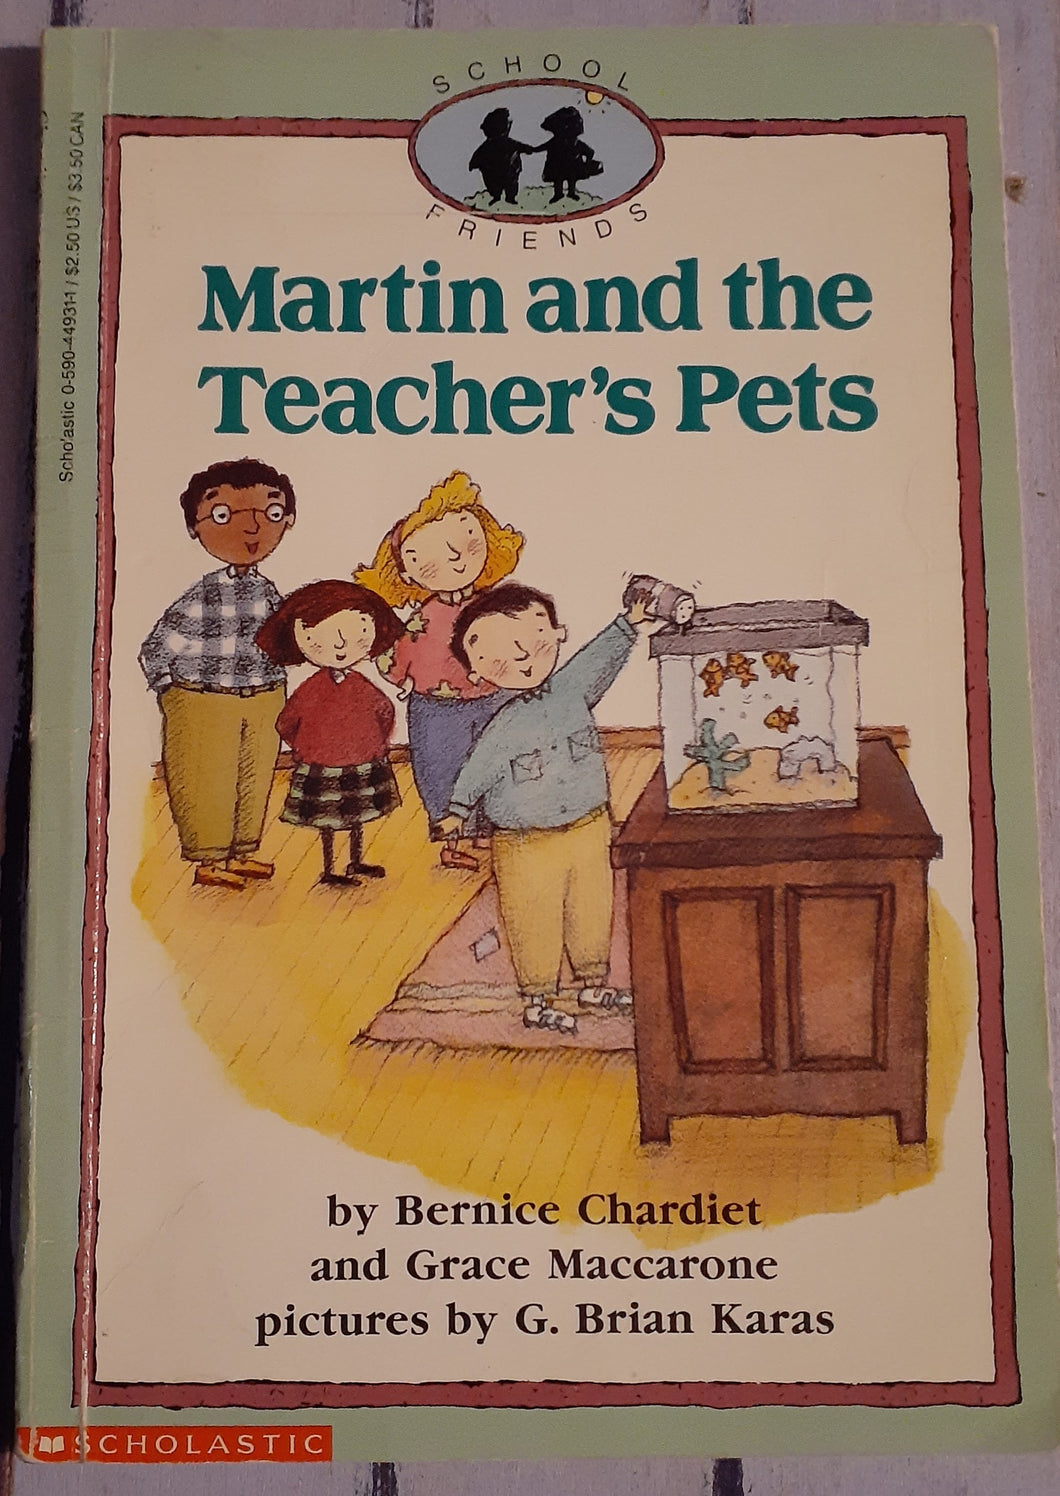 Martin and the Teacher's Pets